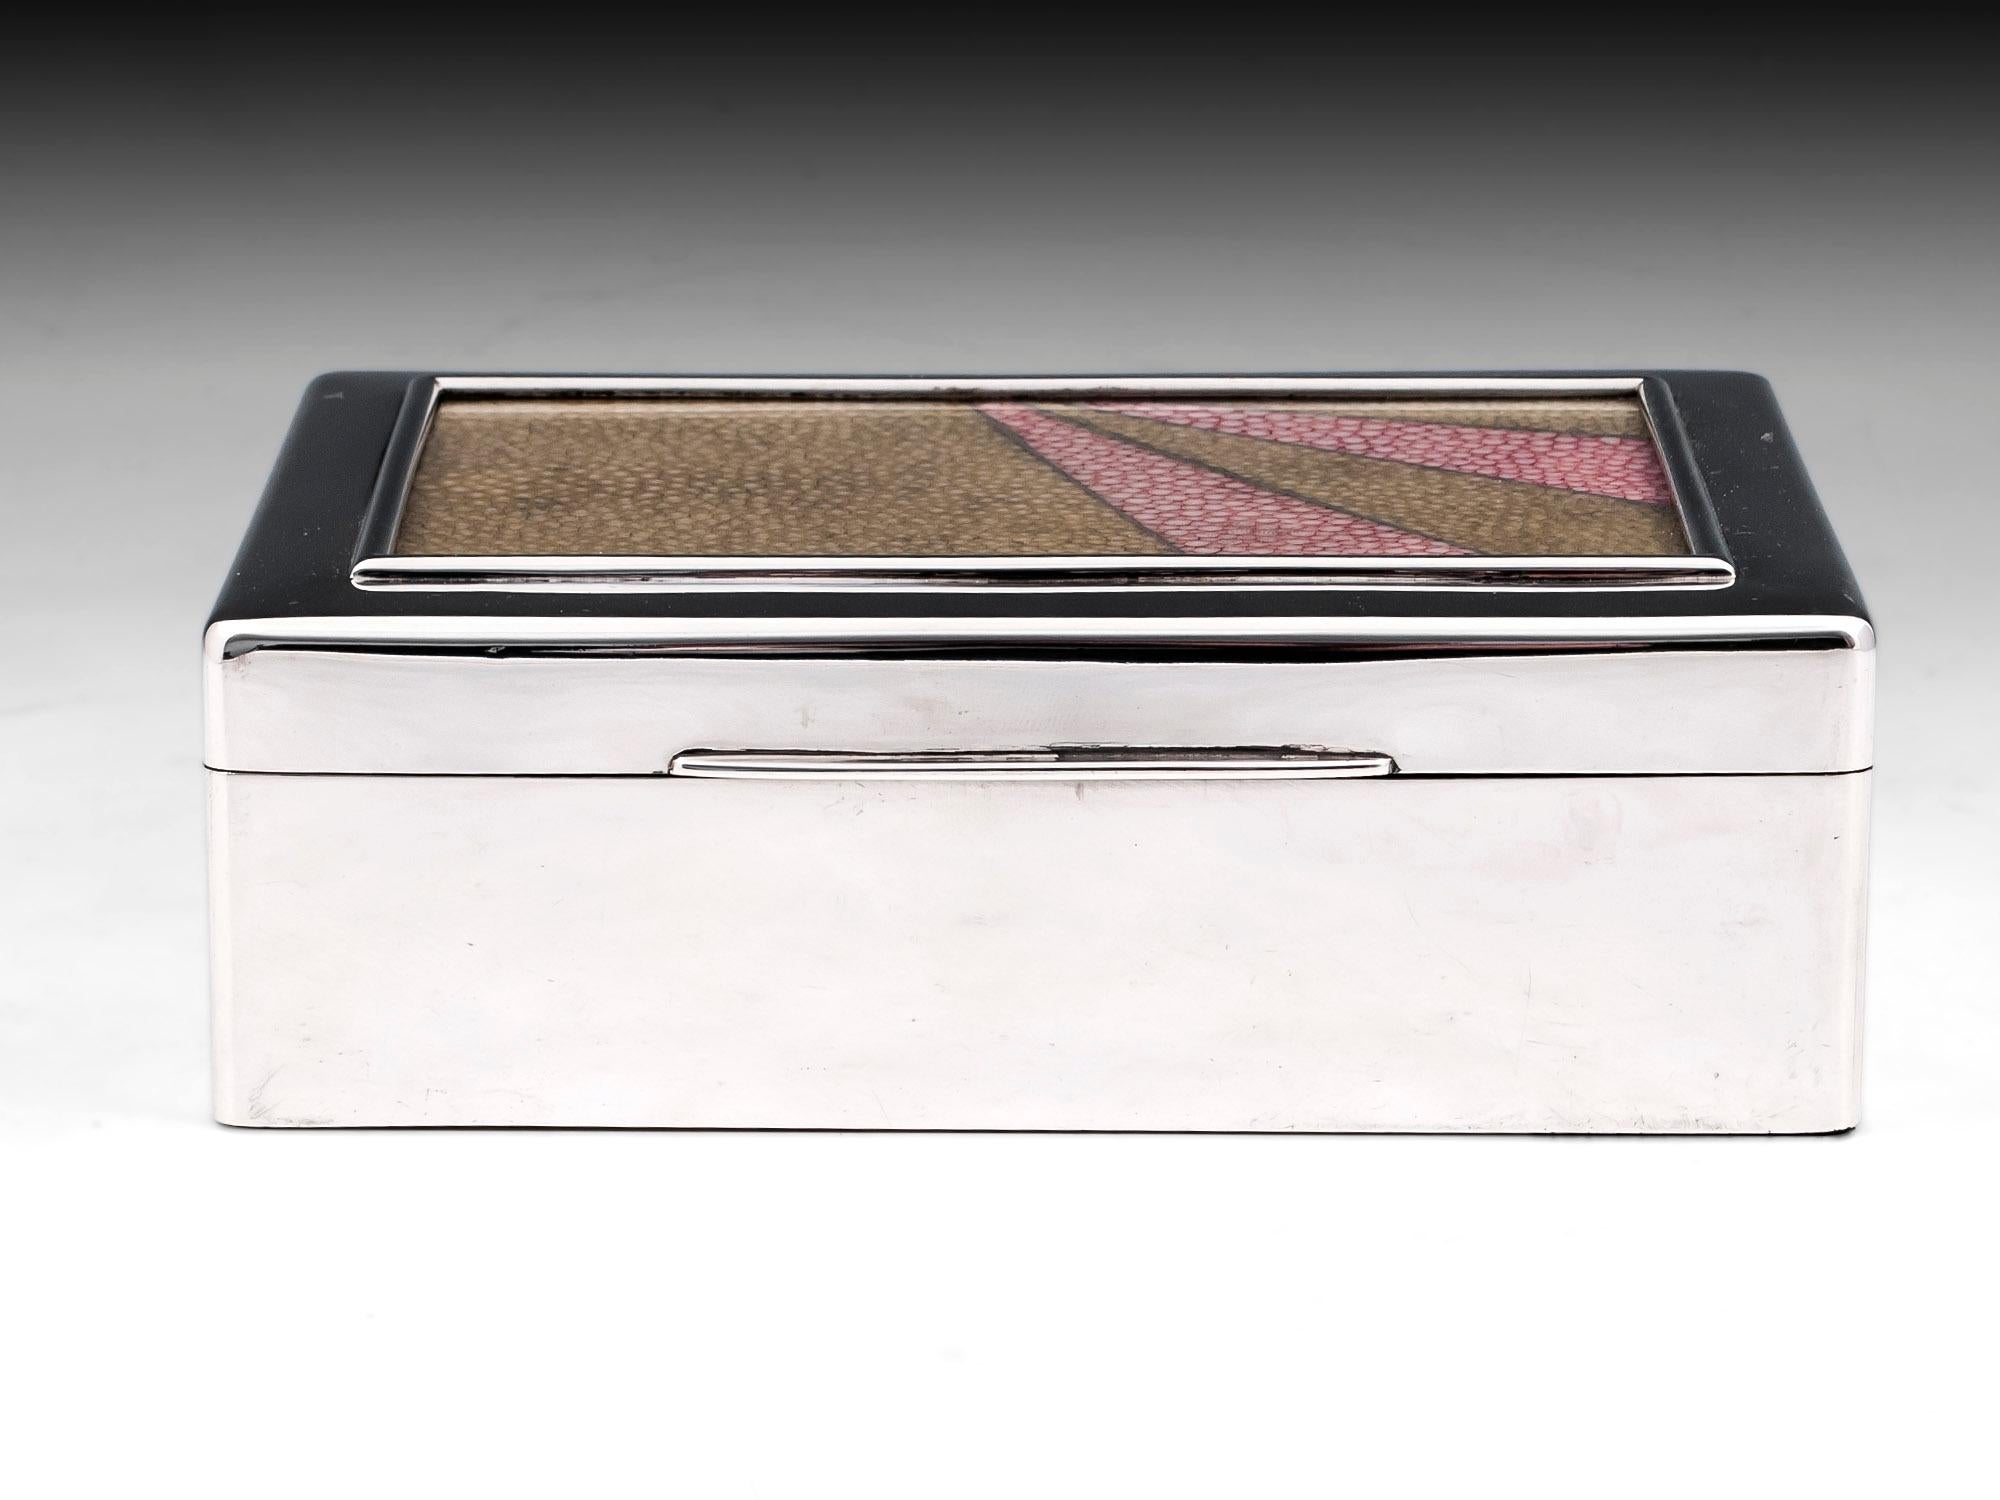 Sterling silver cigar box with pink and green shagreen glazed panel on the lid.
The interior is lined with satin cedar wood with a removable compartment divider.
By London Silversmith John Septimus Beresford, 1913.